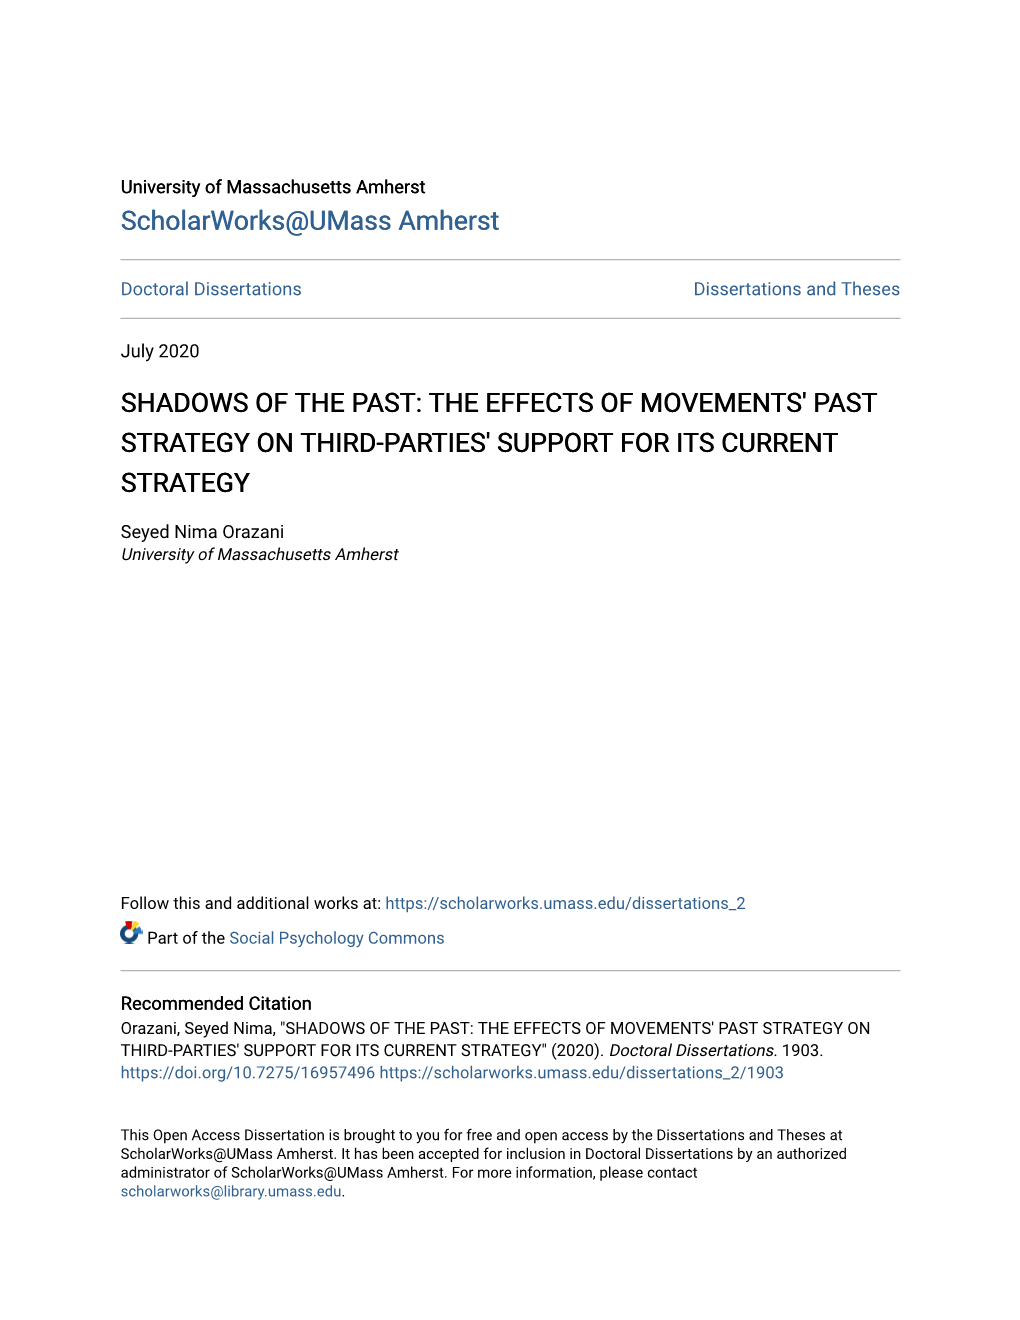 The Effects of Movements' Past Strategy on Third-Parties' Support for Its Current Strategy